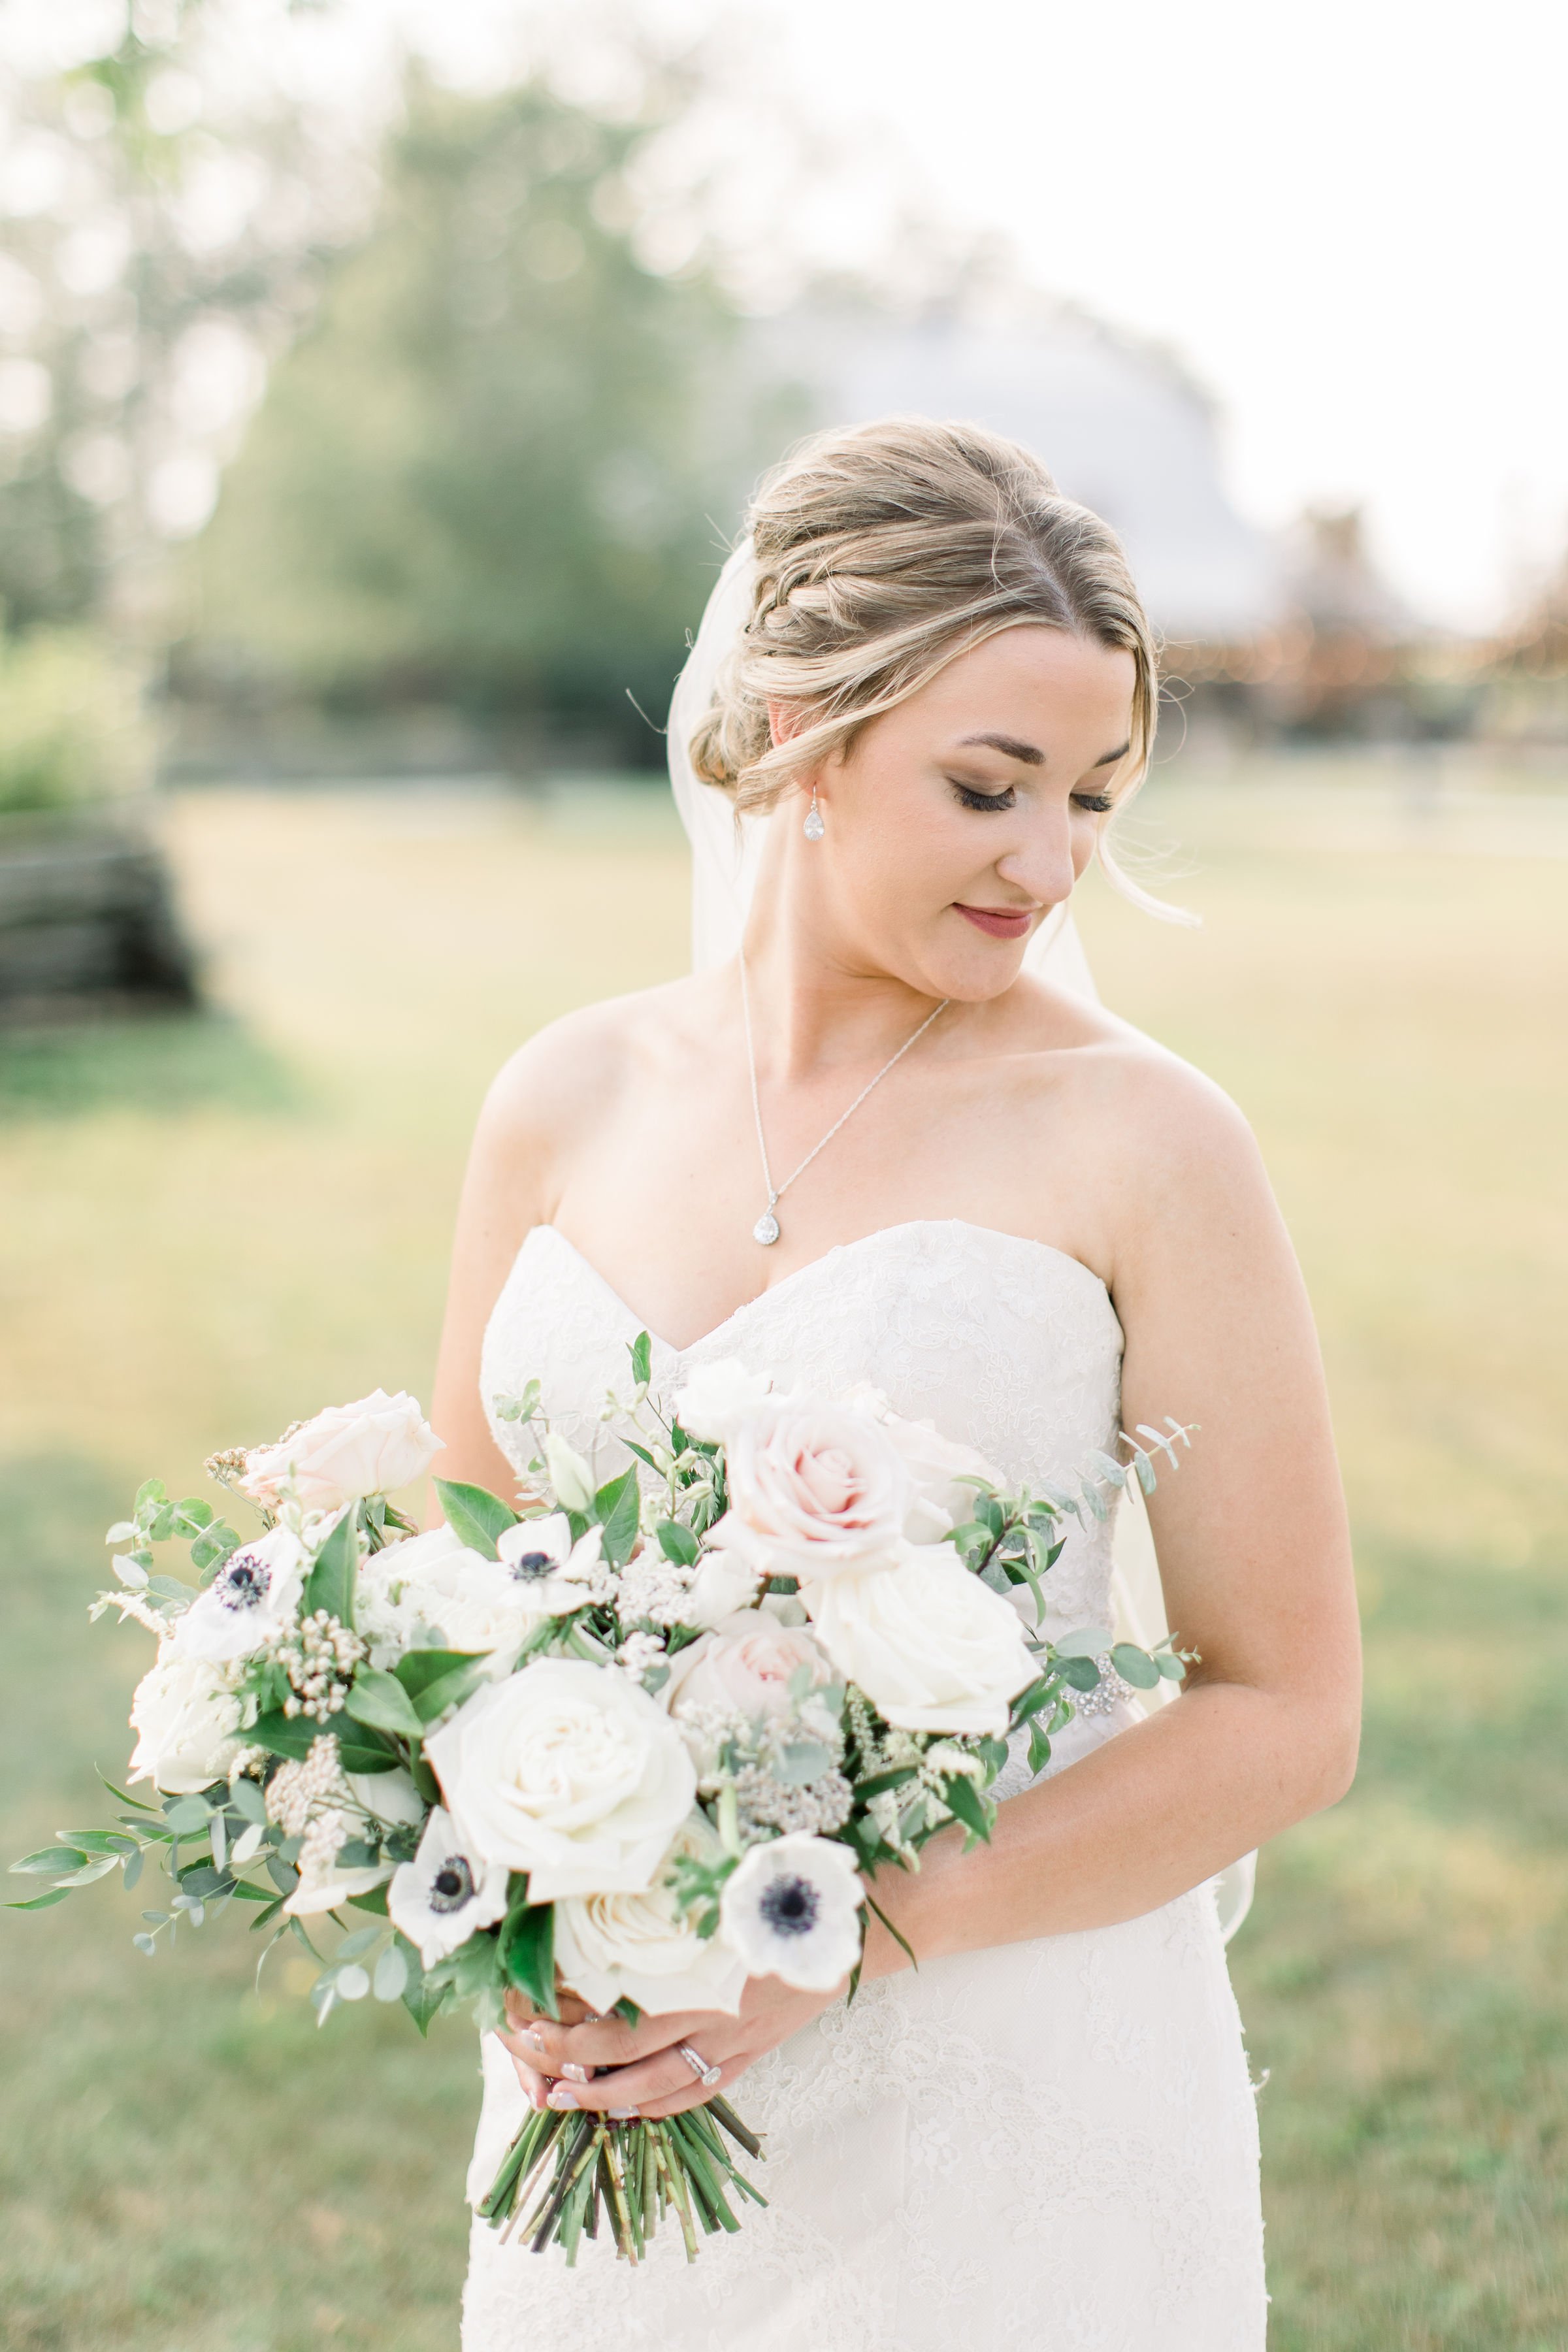  At an Ontario wedding, Chelsea Mason Photography captures a bride in a grass field looking down. summer wedding Ontario #StonefieldEstates #Ontarioweddings #Chelseamasonphotography #Chelseamasonengagements #Ontarioweddingphotographers 